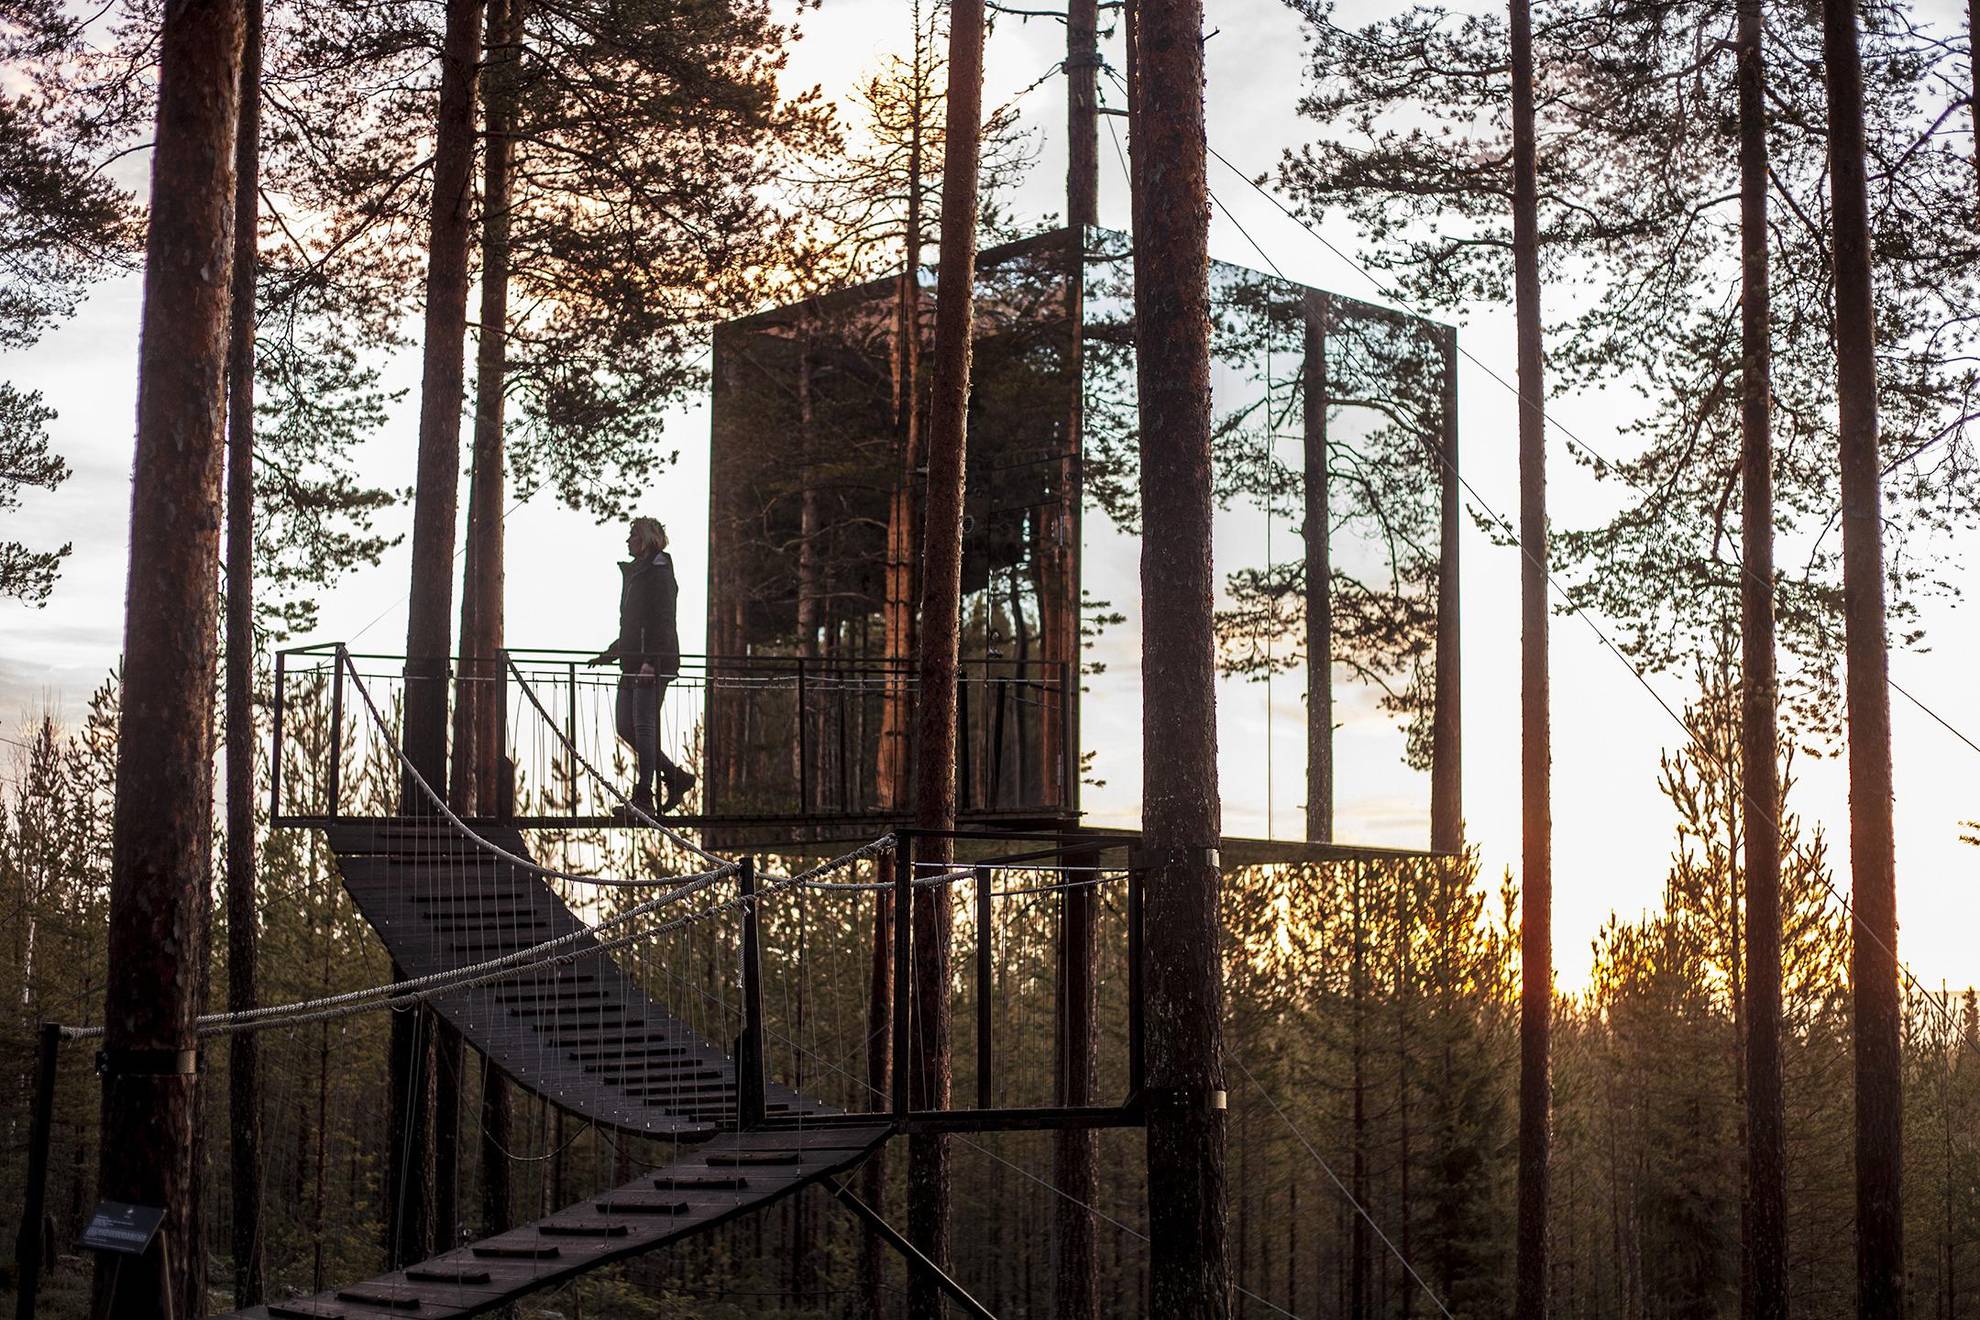 The Mirrorcube at the Treehotel in Harads, Swedish Lapland